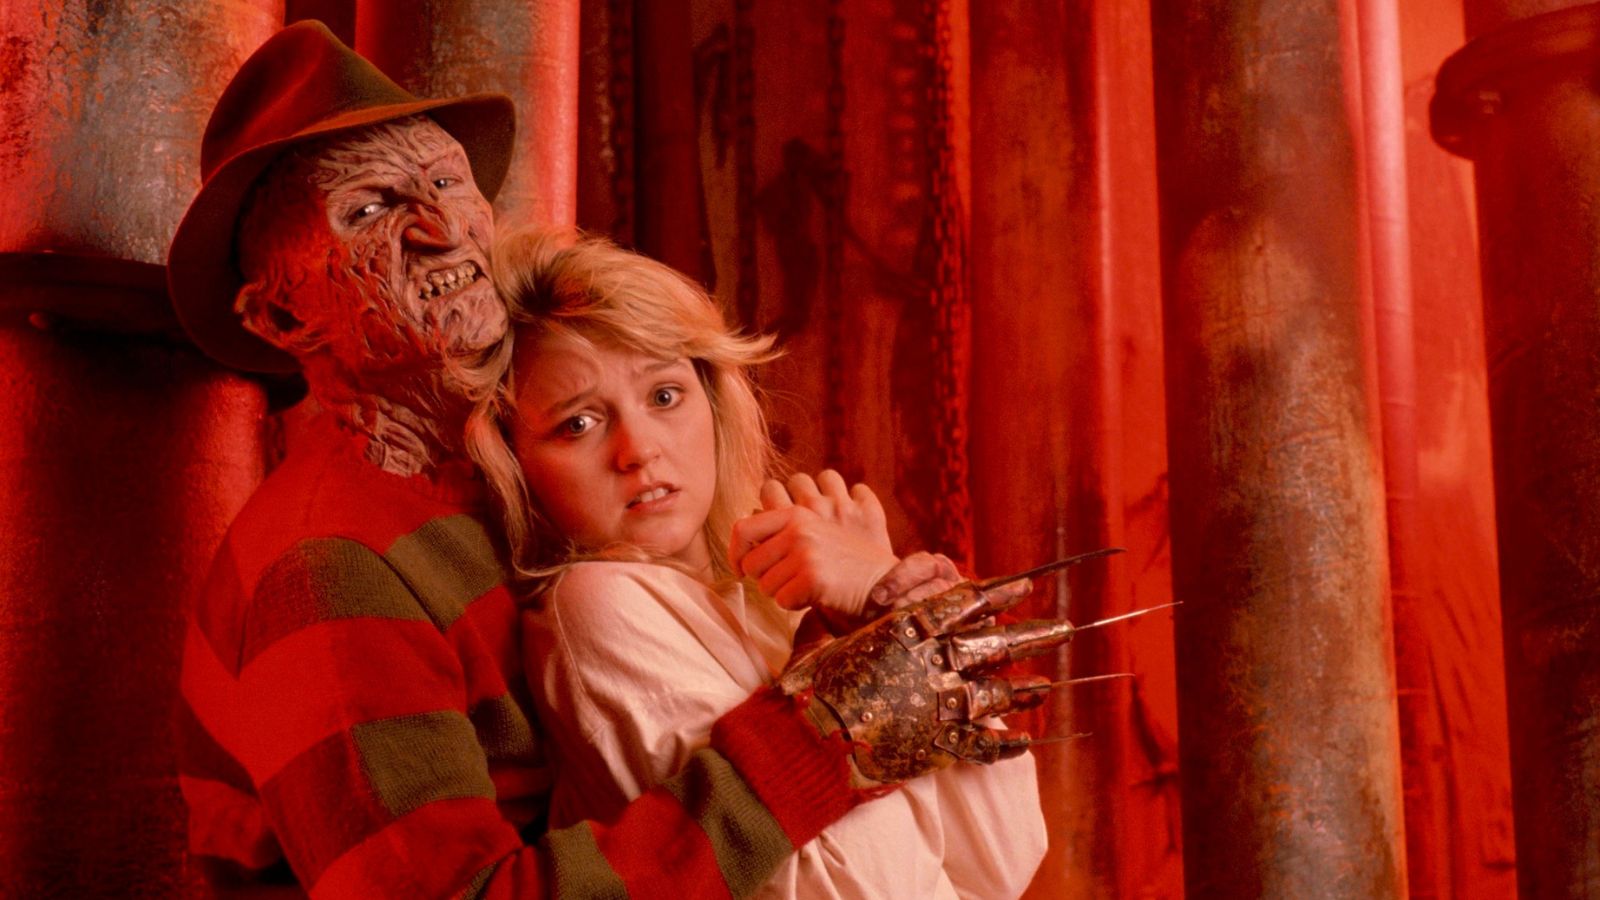 Horror fans present ridiculously campy ideas to reboot ‘Nightmare on Elm Street’